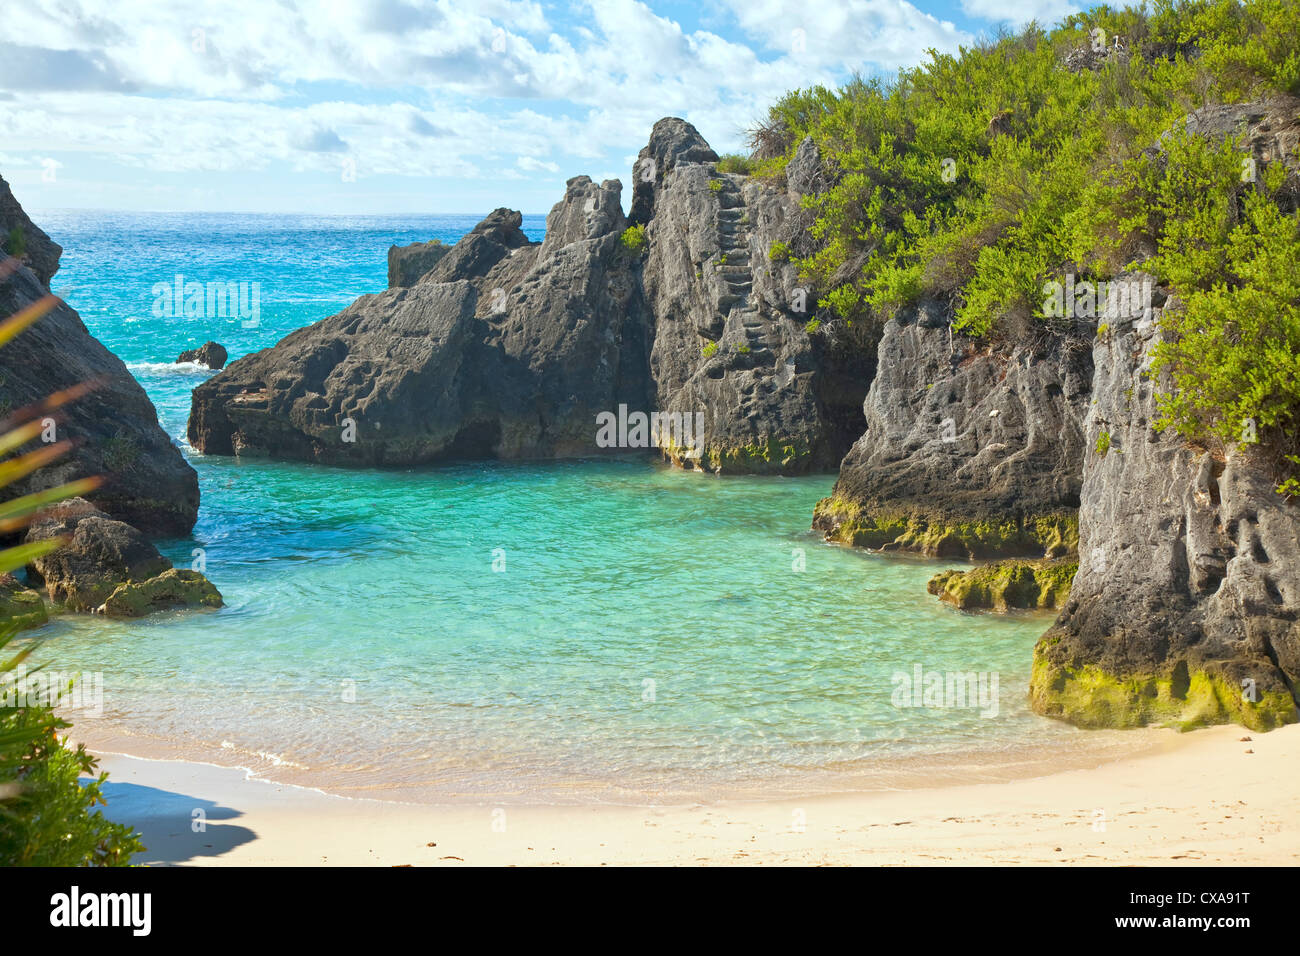 The beautiful secluded romantic Jobson Cove Beach on the south side of Bermuda. Stock Photo